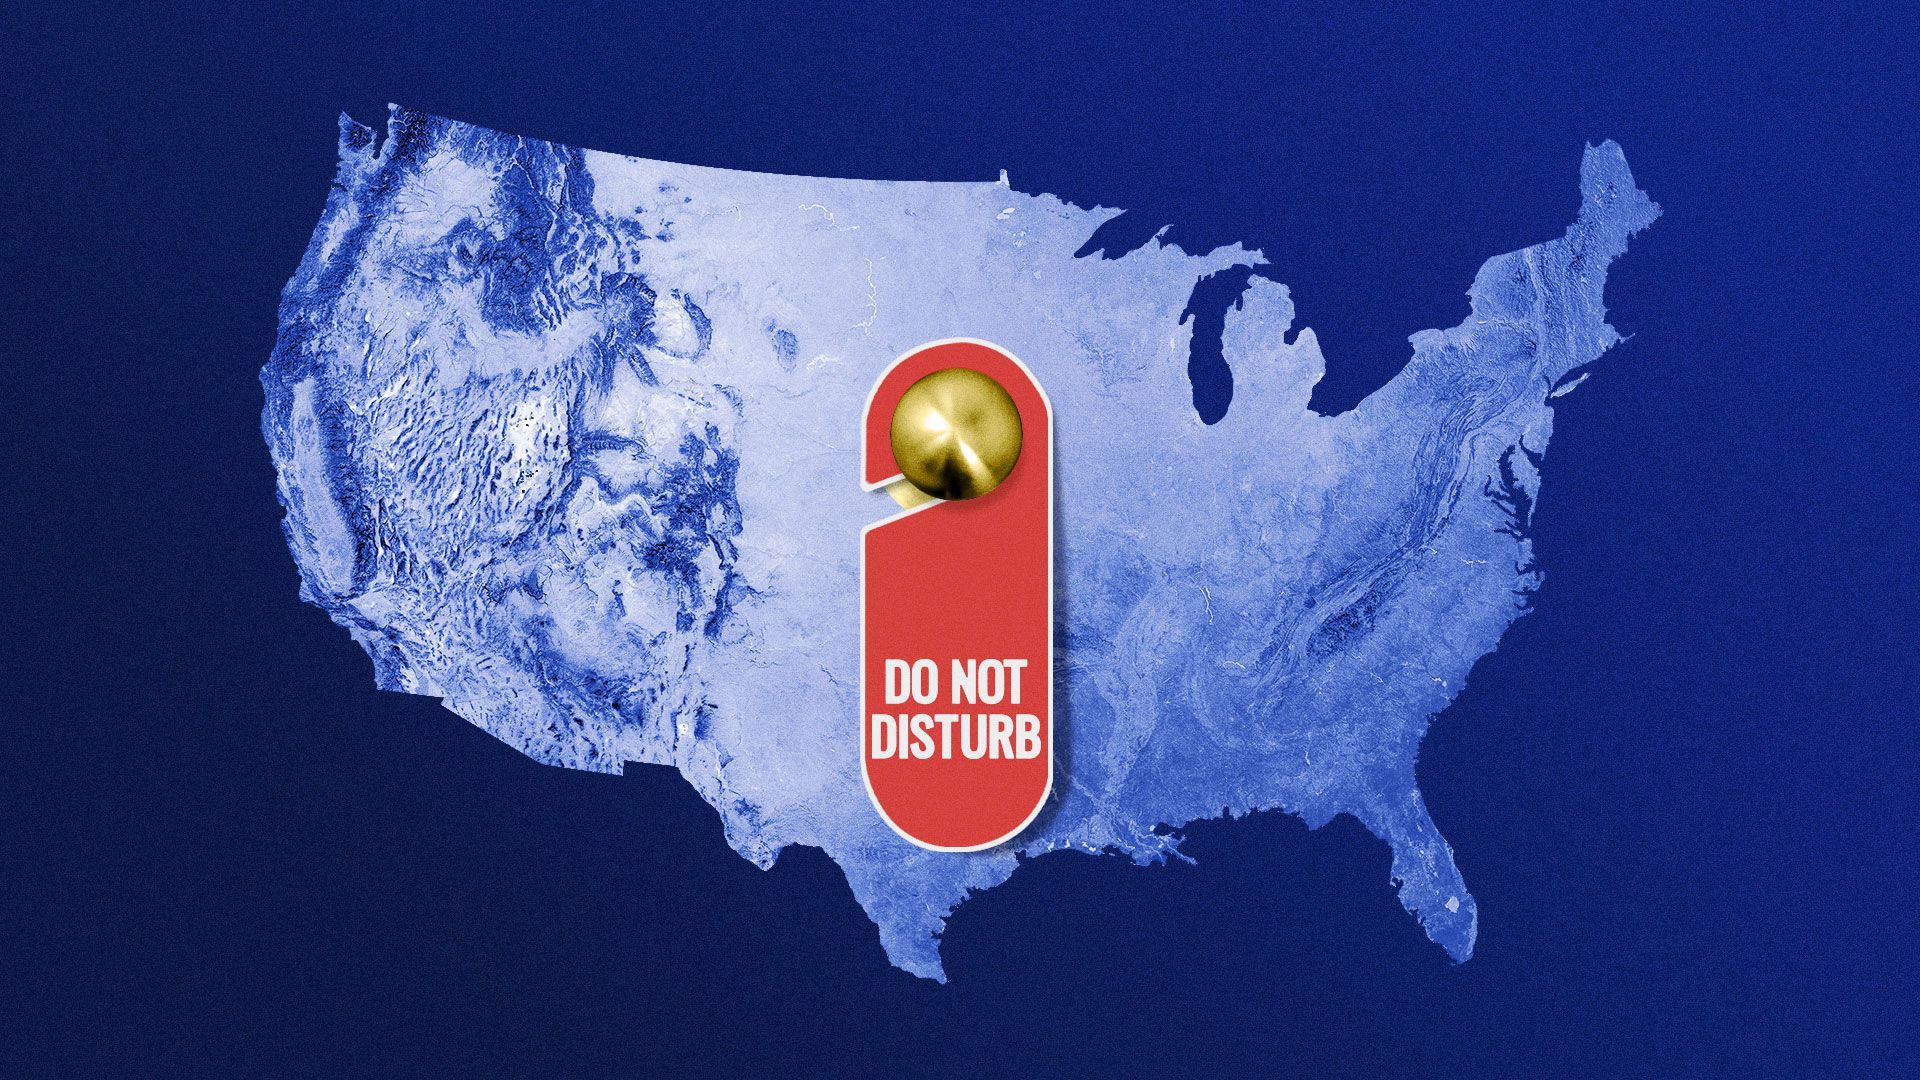 Illustration of US map with a “Do not disturb sign”